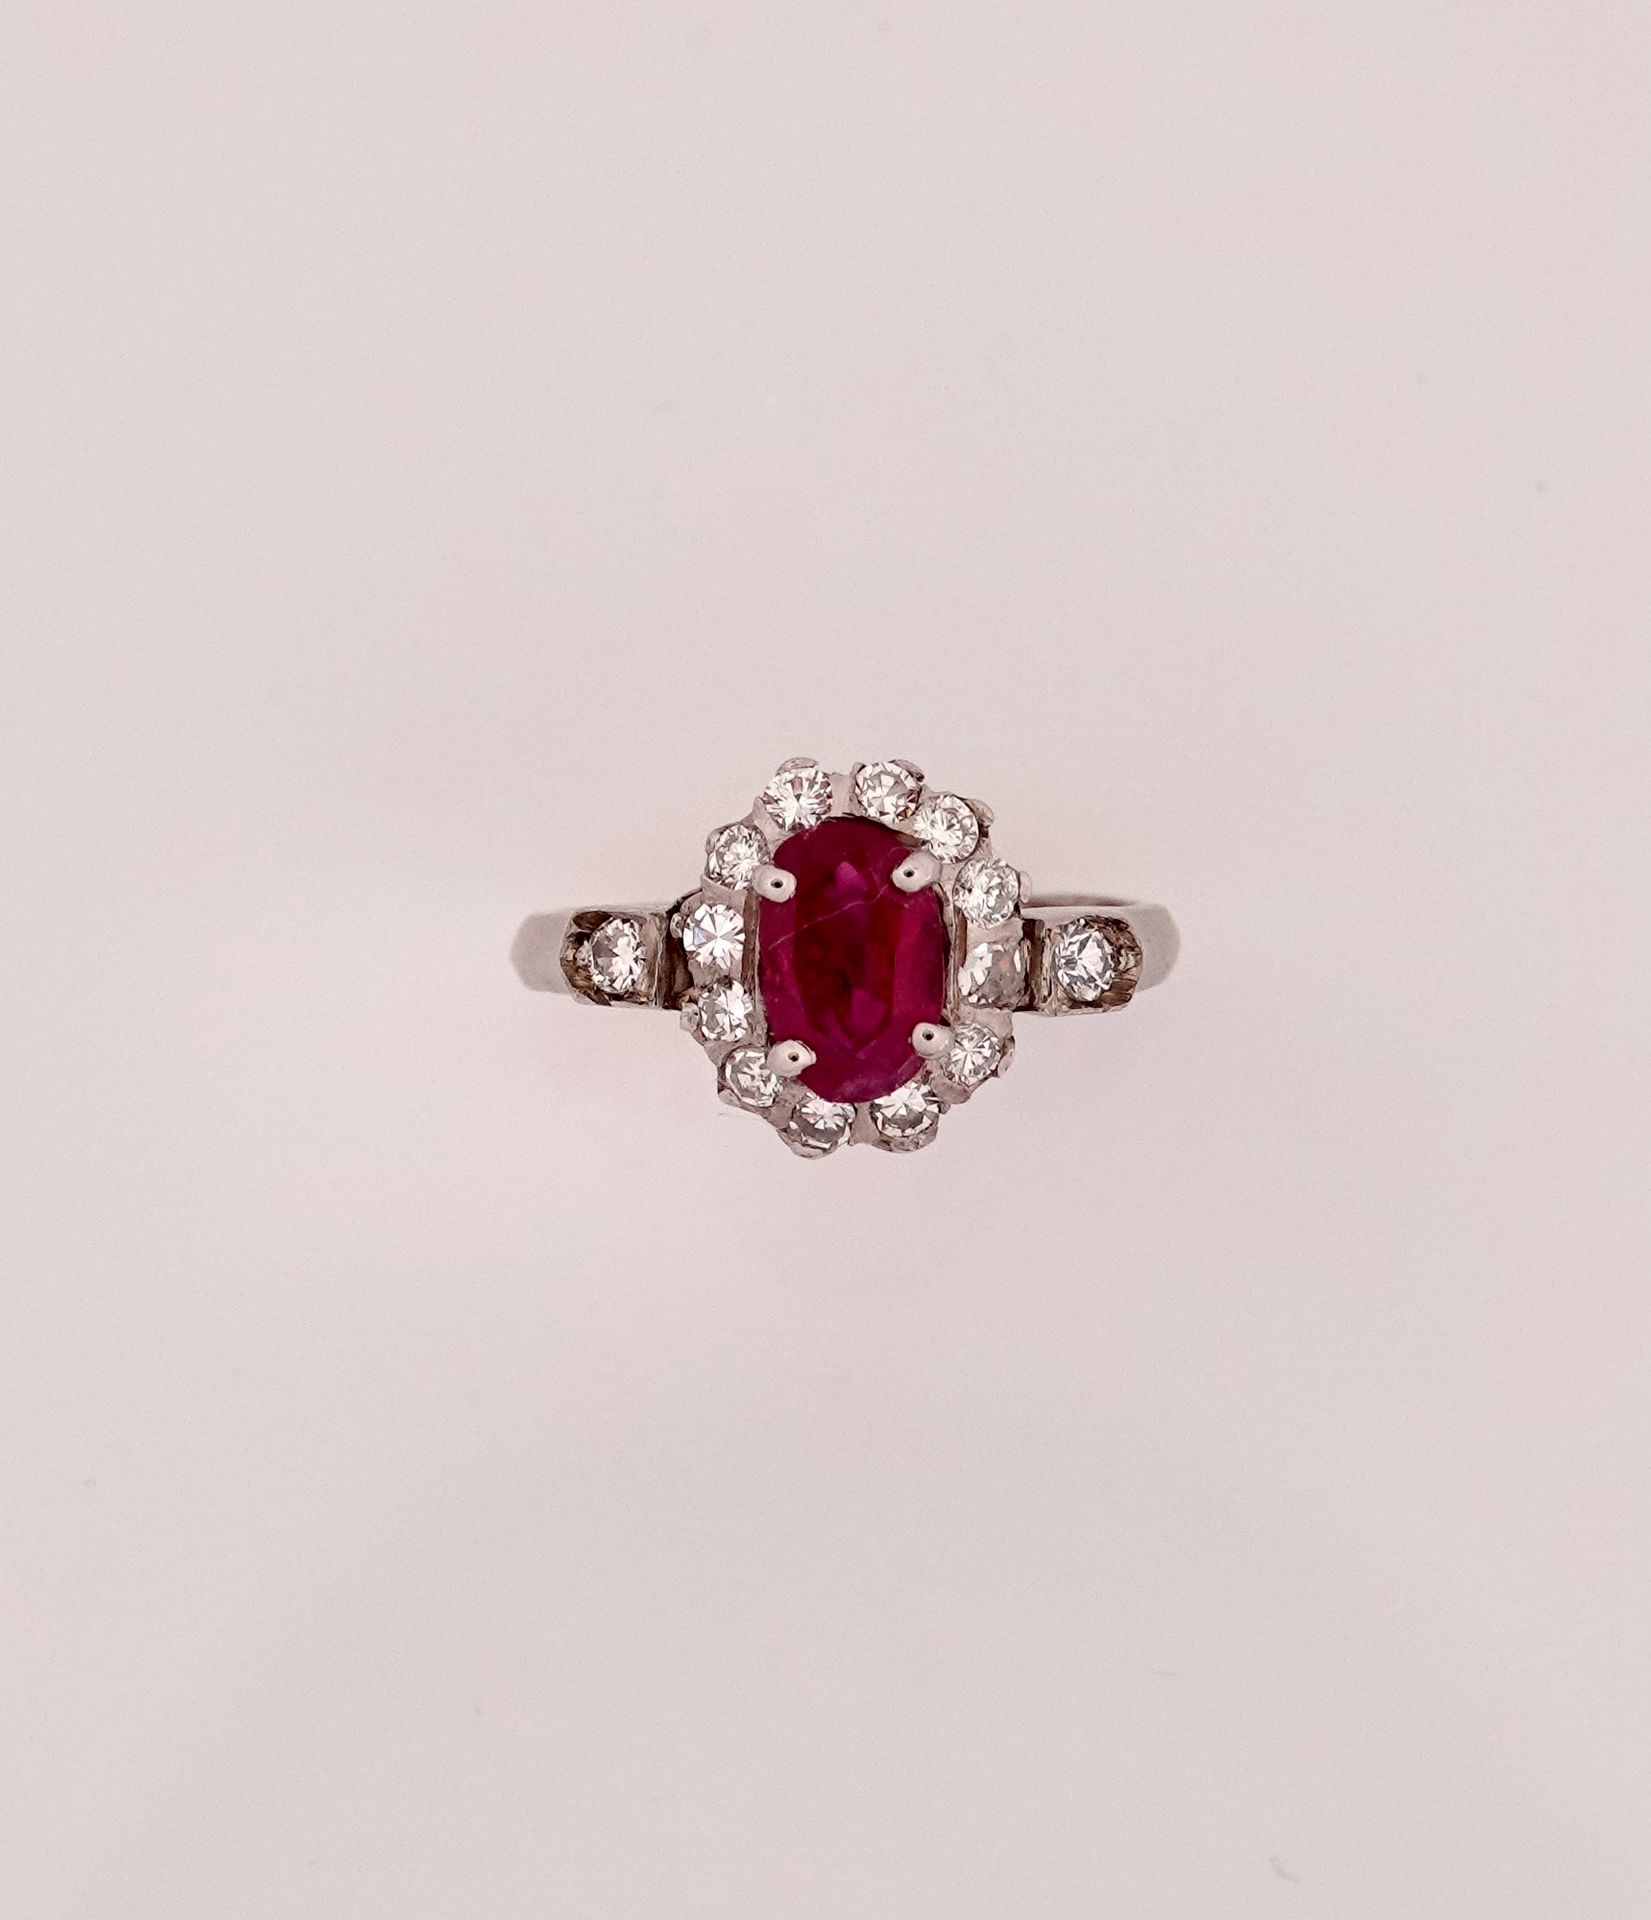 Null Ring in white gold, 750 MM, centered by an oval ruby in a row of diamonds, &hellip;